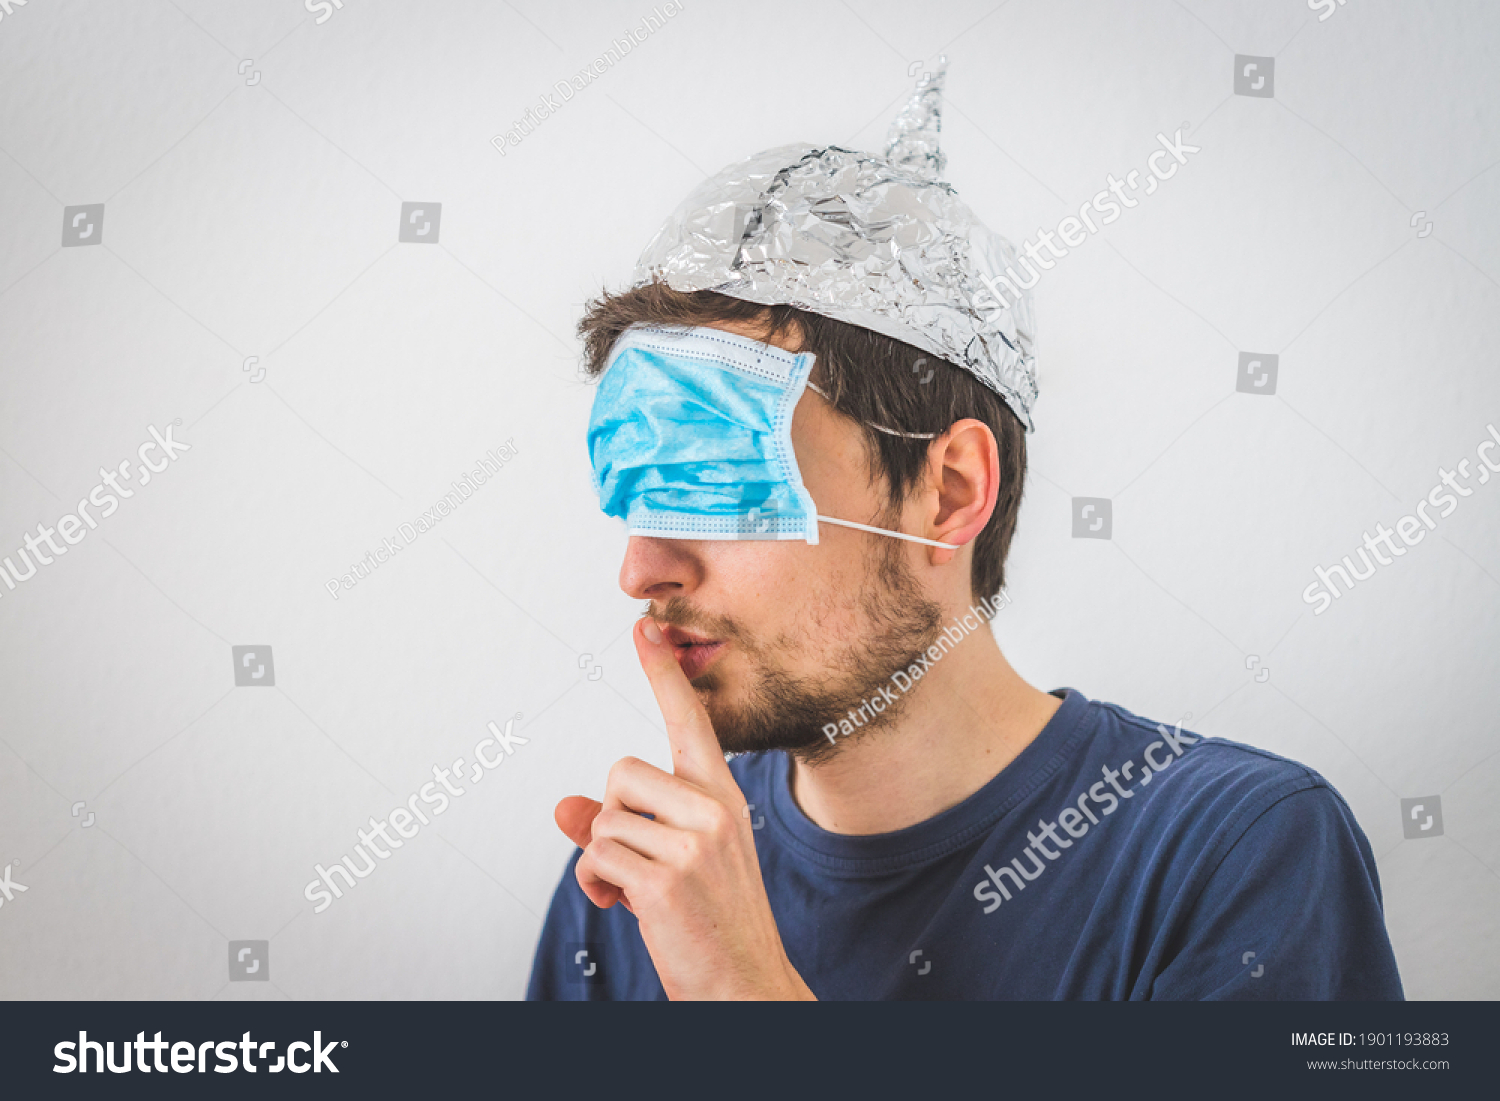 Stock Photo Young Angry Man With Face Mask Over The Eyes And Aluminum Hat Is Doing A Psst Gesture 1901193883 